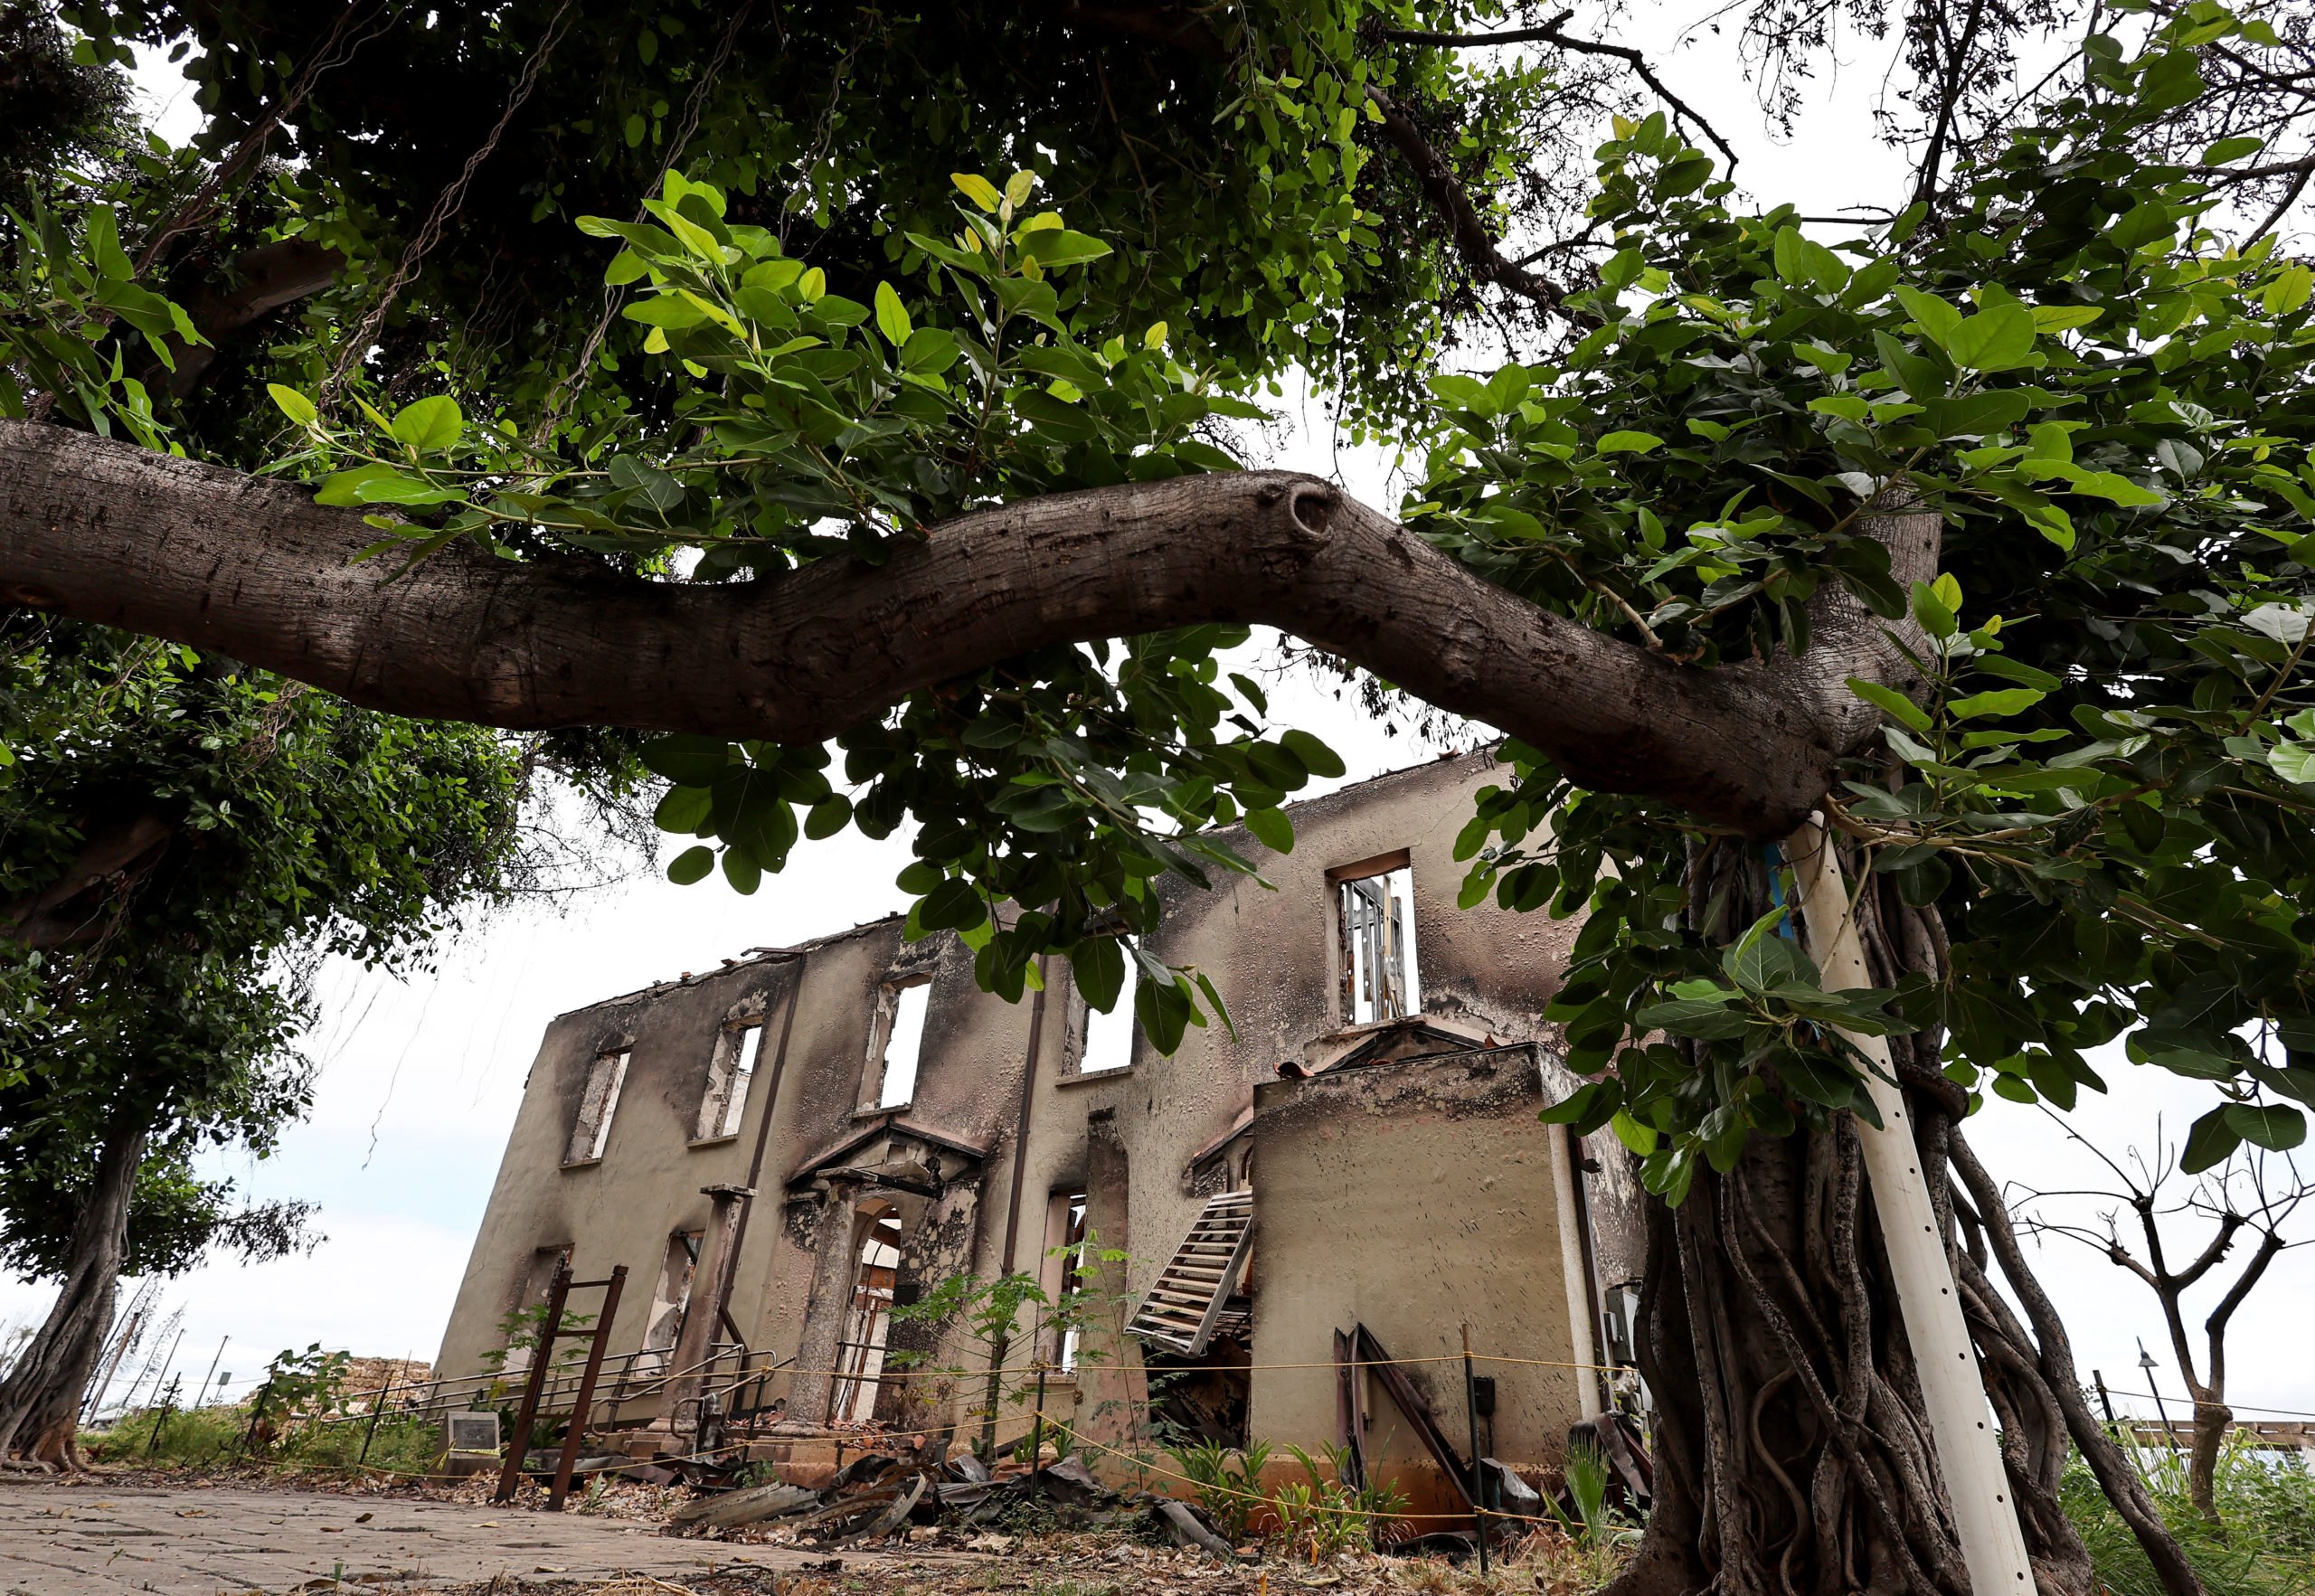 LAHAINA, HAWAII - AUGUST 02: Fresh leaves grow on the historic beloved banyan tree in front of the remains of the Old Lahaina Courthouse, built in 1859, inside the Lahaina wildfire impact zone on August 02, 2024 in Lahaina, Hawaii. August 8 marks the one-year anniversary of the Maui wildfires which killed 102 people and devastated the historic community of Lahaina in West Maui. Plaintiffs involved in the Lahaina wildfire lawsuits against the government and utilities have reached a $4 billion global settlement of claims. (Photo by Mario Tama/Getty Images)